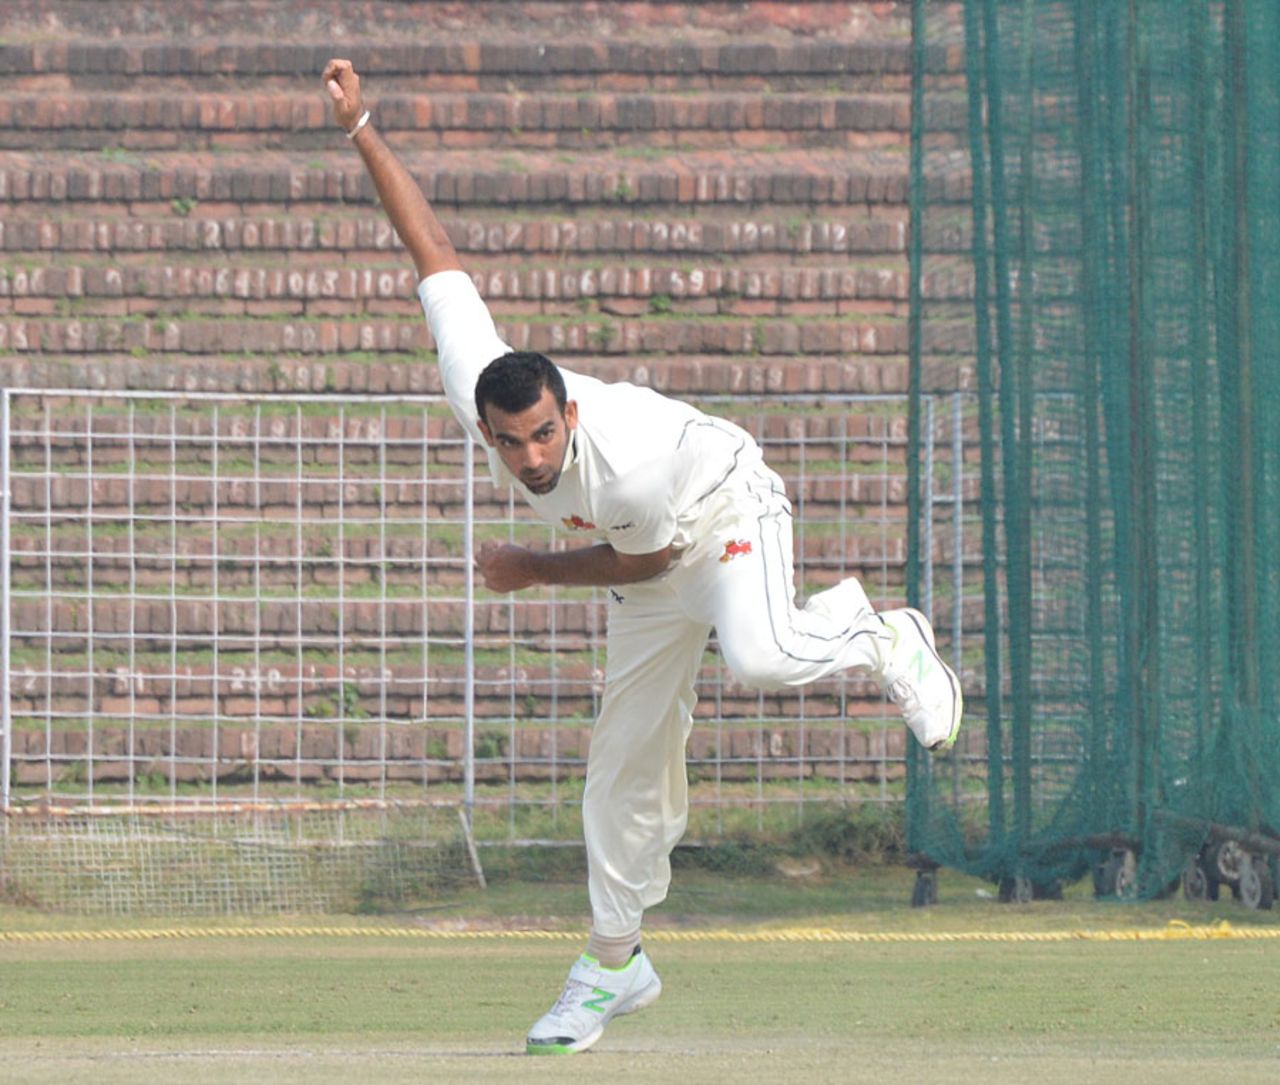 Zaheer Khan in his delivery stride, Punjab v Mumbai, Ranji Trophy, Group A, 1st day, Chandigarh, November 7, 2013